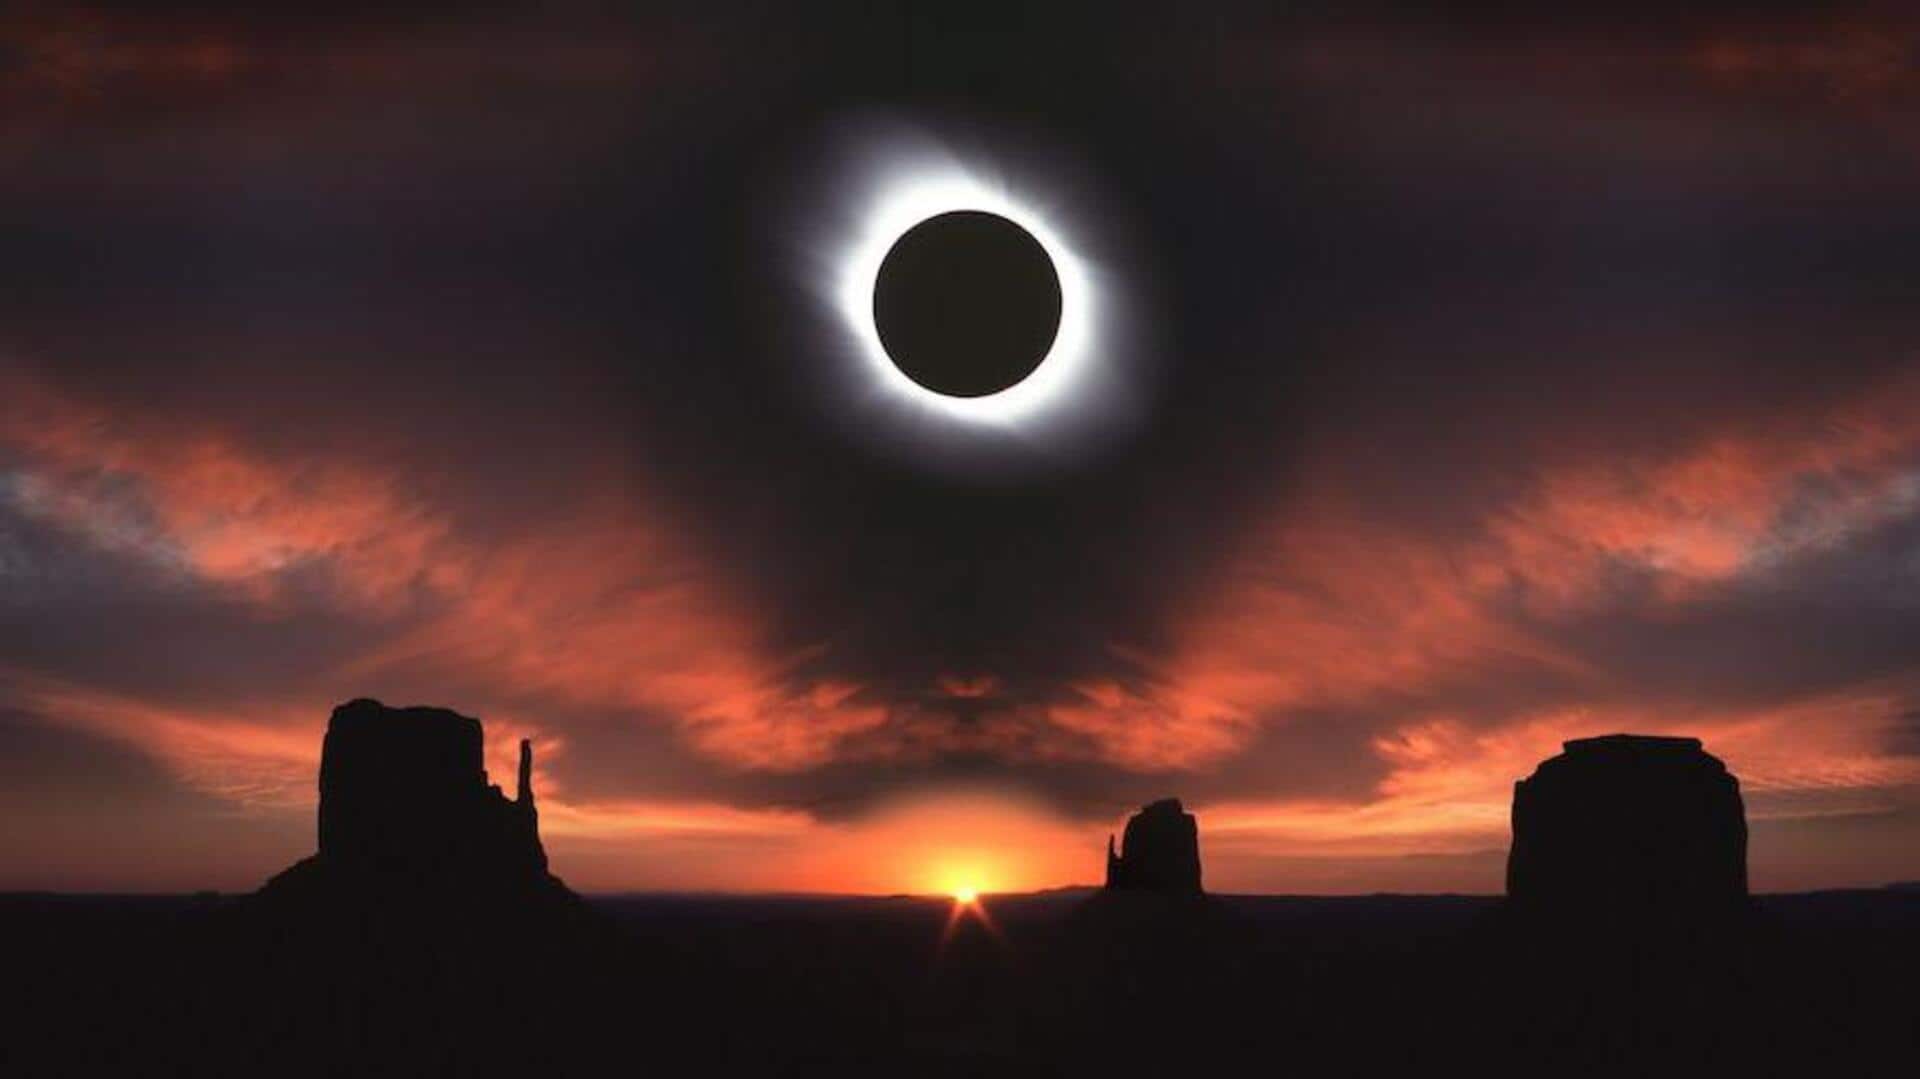 Total solar eclipse on April 8: What makes it special?